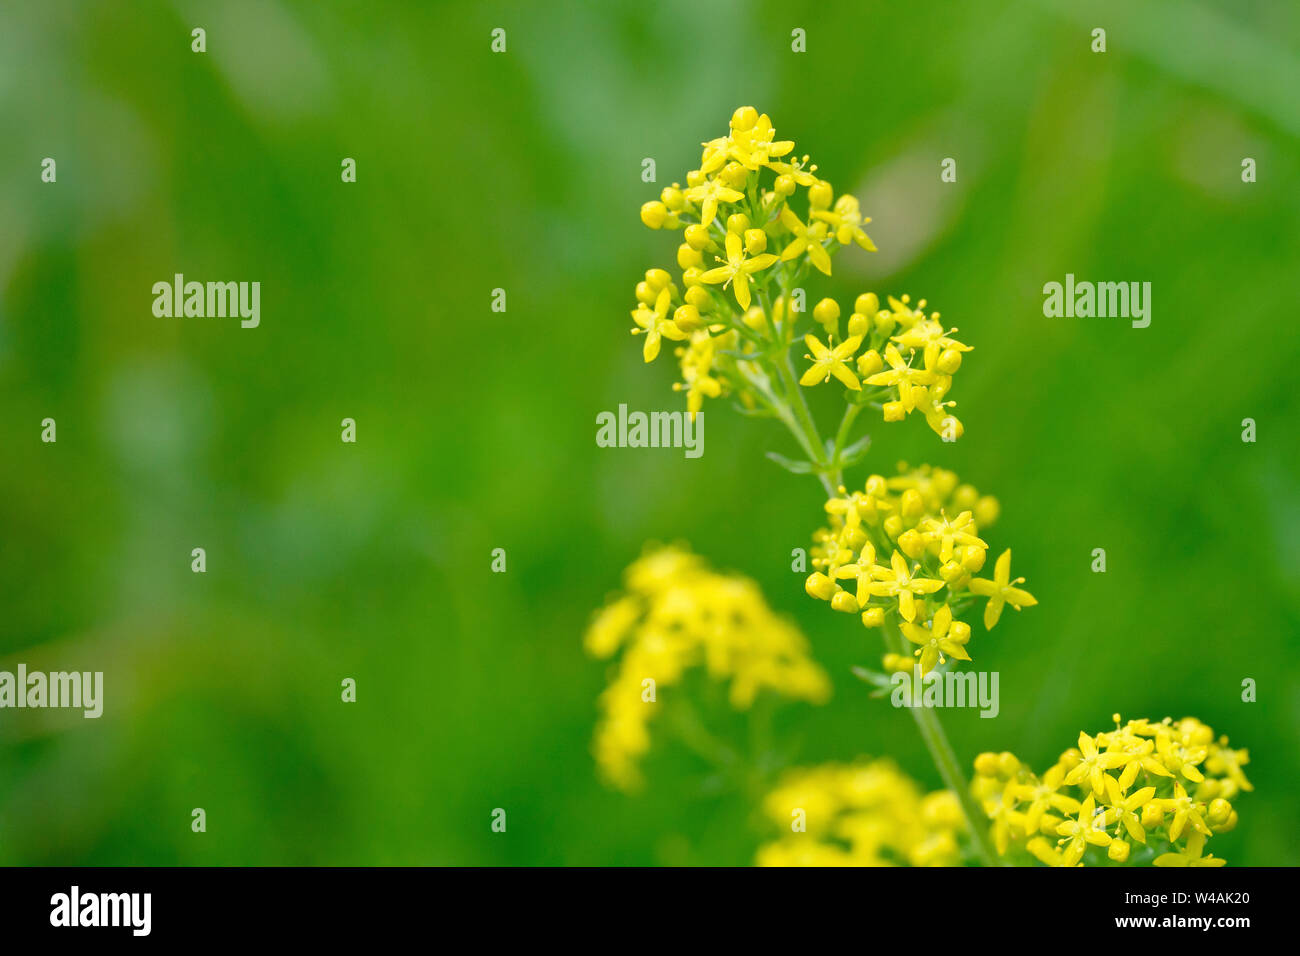 Lady's Bedstraw (galium verum), close up showing detail in the tiny yellow flowers of the plant. Stock Photo